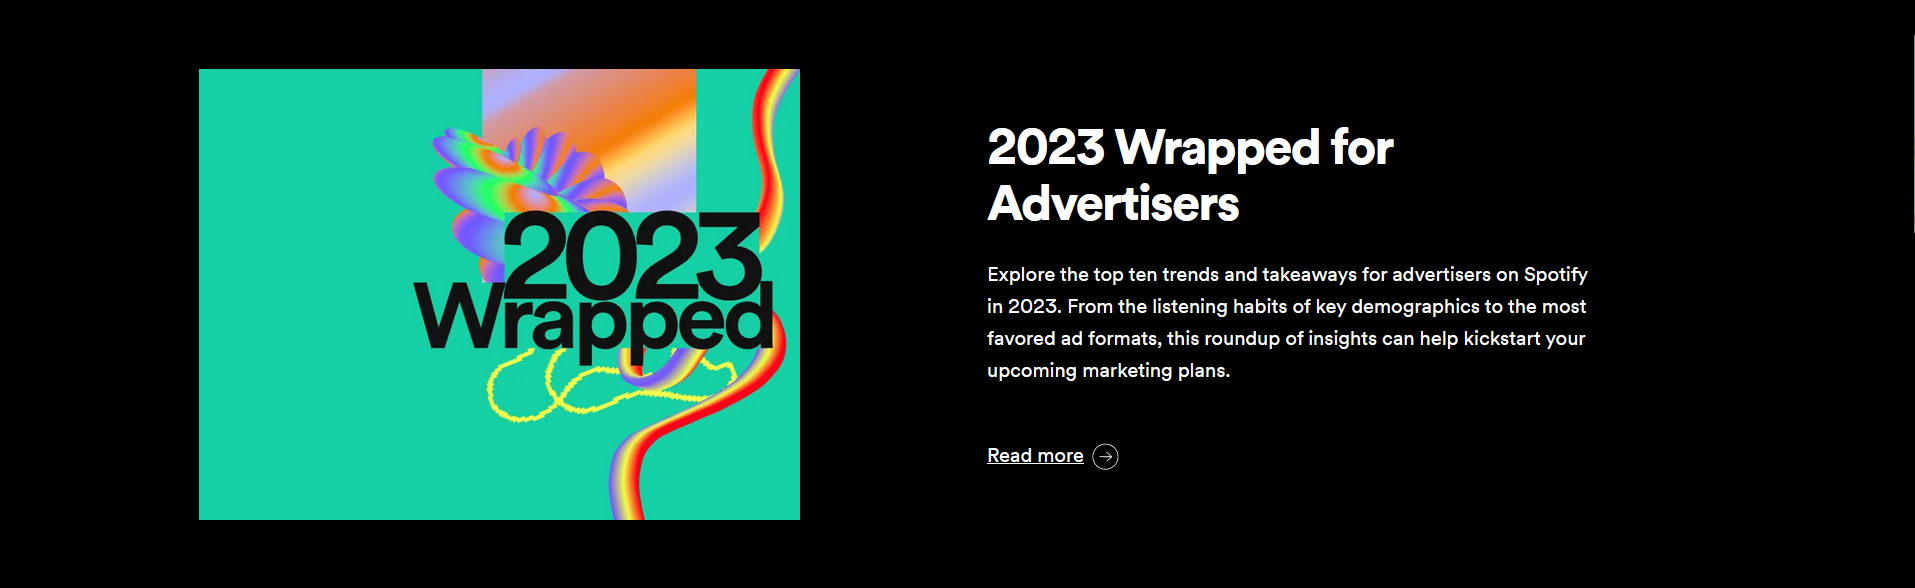 Spotify Wrapped Advertisers